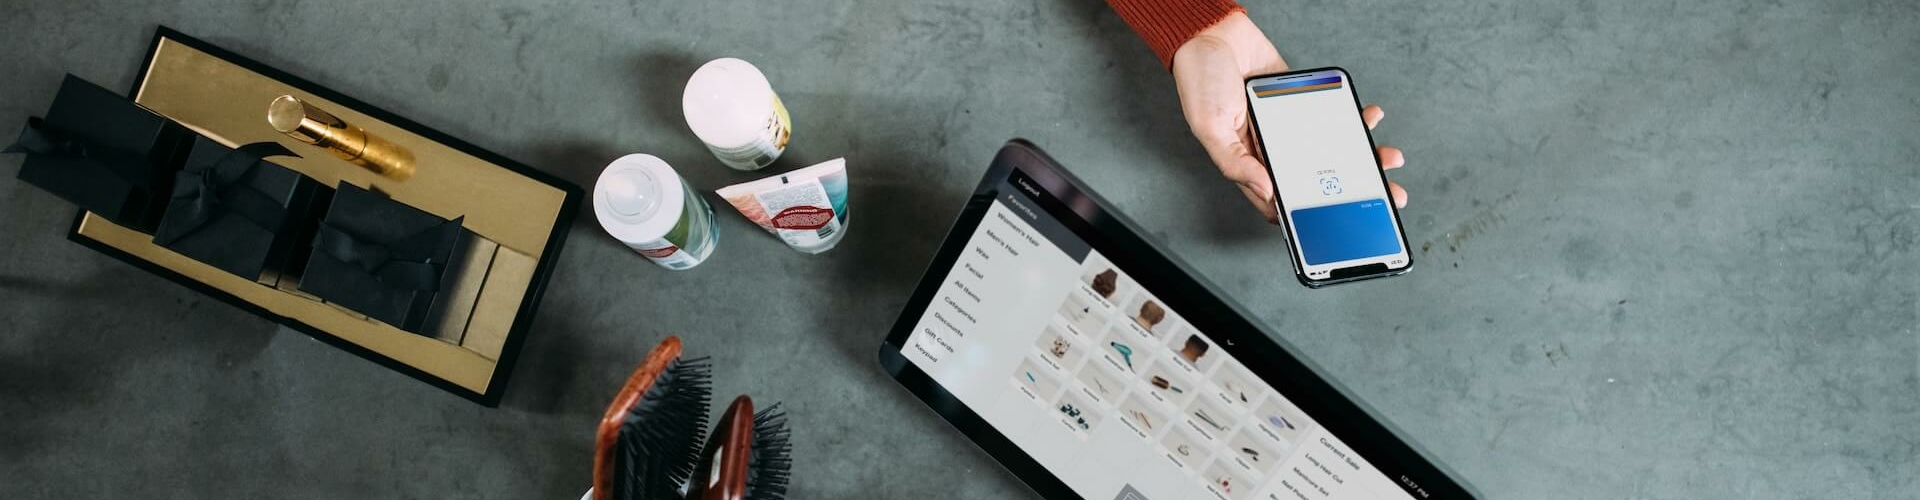 The 6 best NFC payment apps